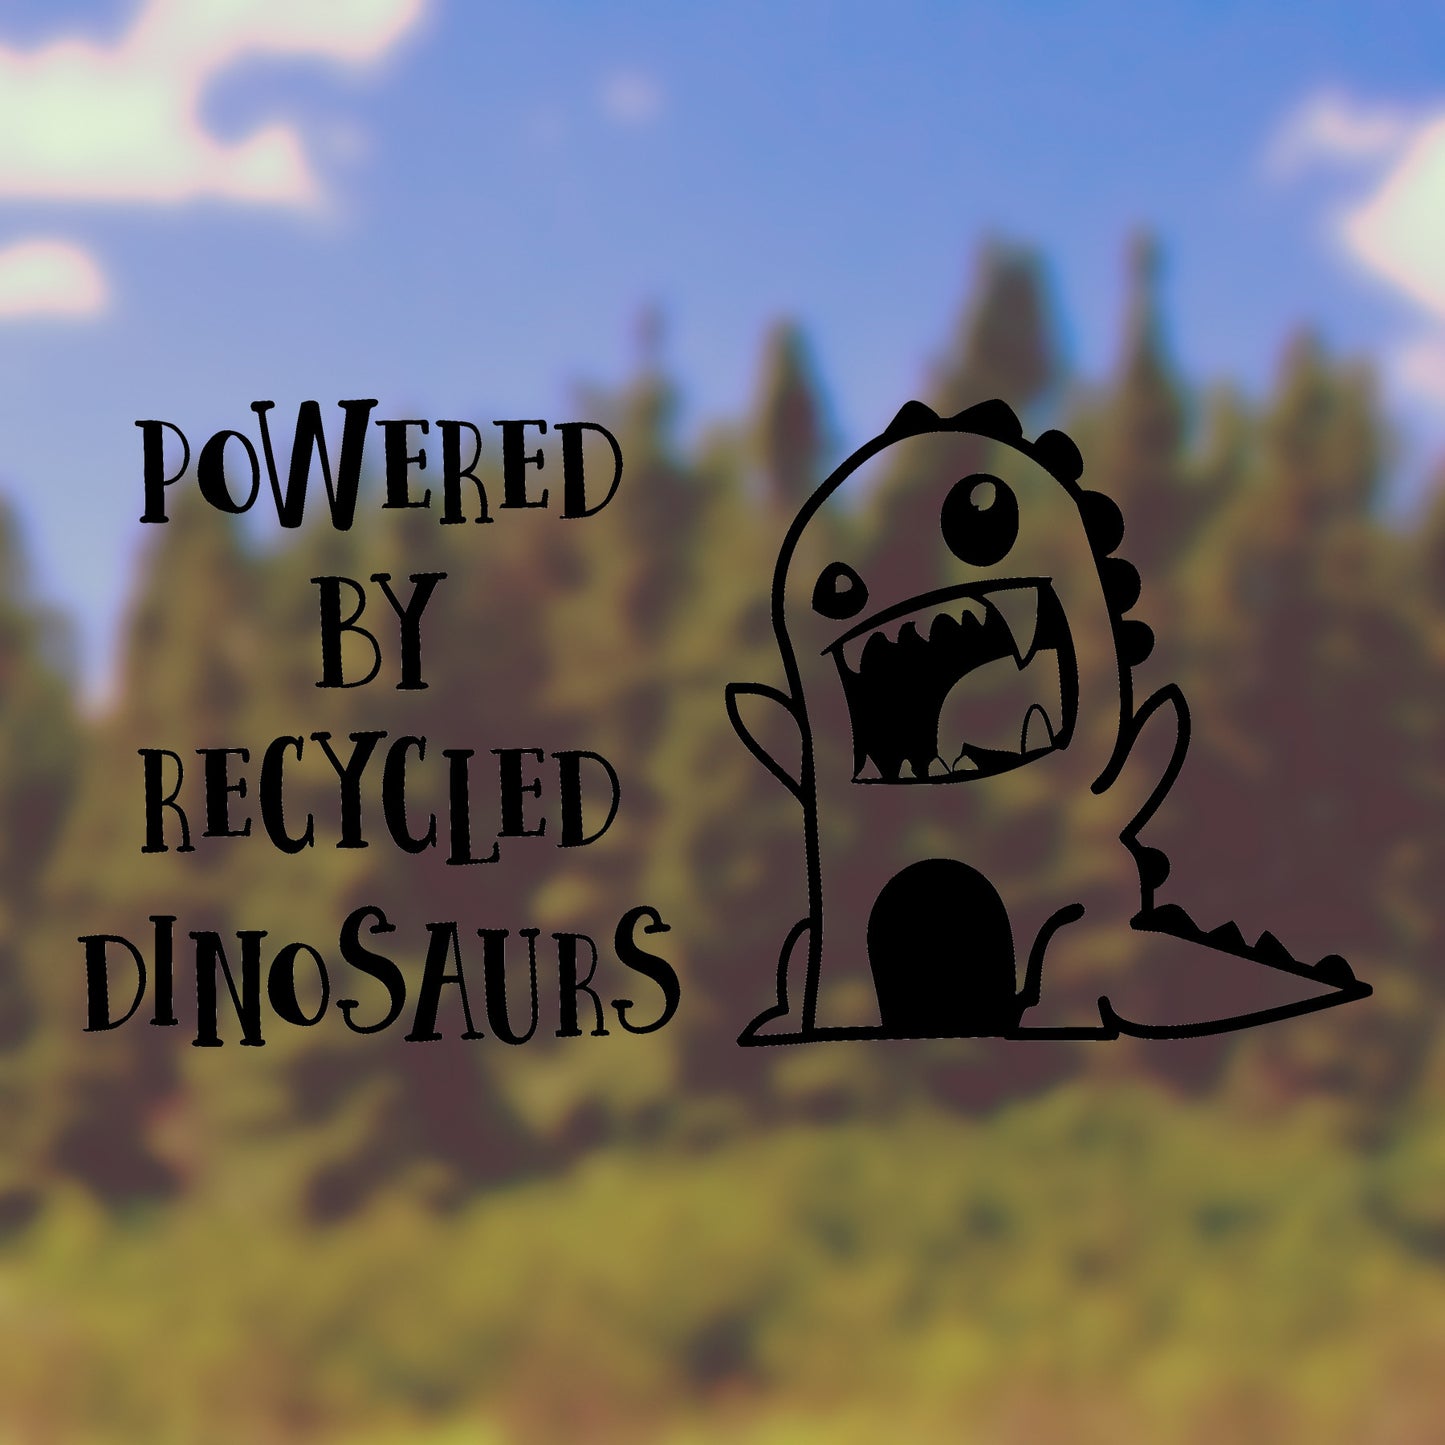 Powered by recycled dinosaurs | Bumper sticker - Adnil Creations